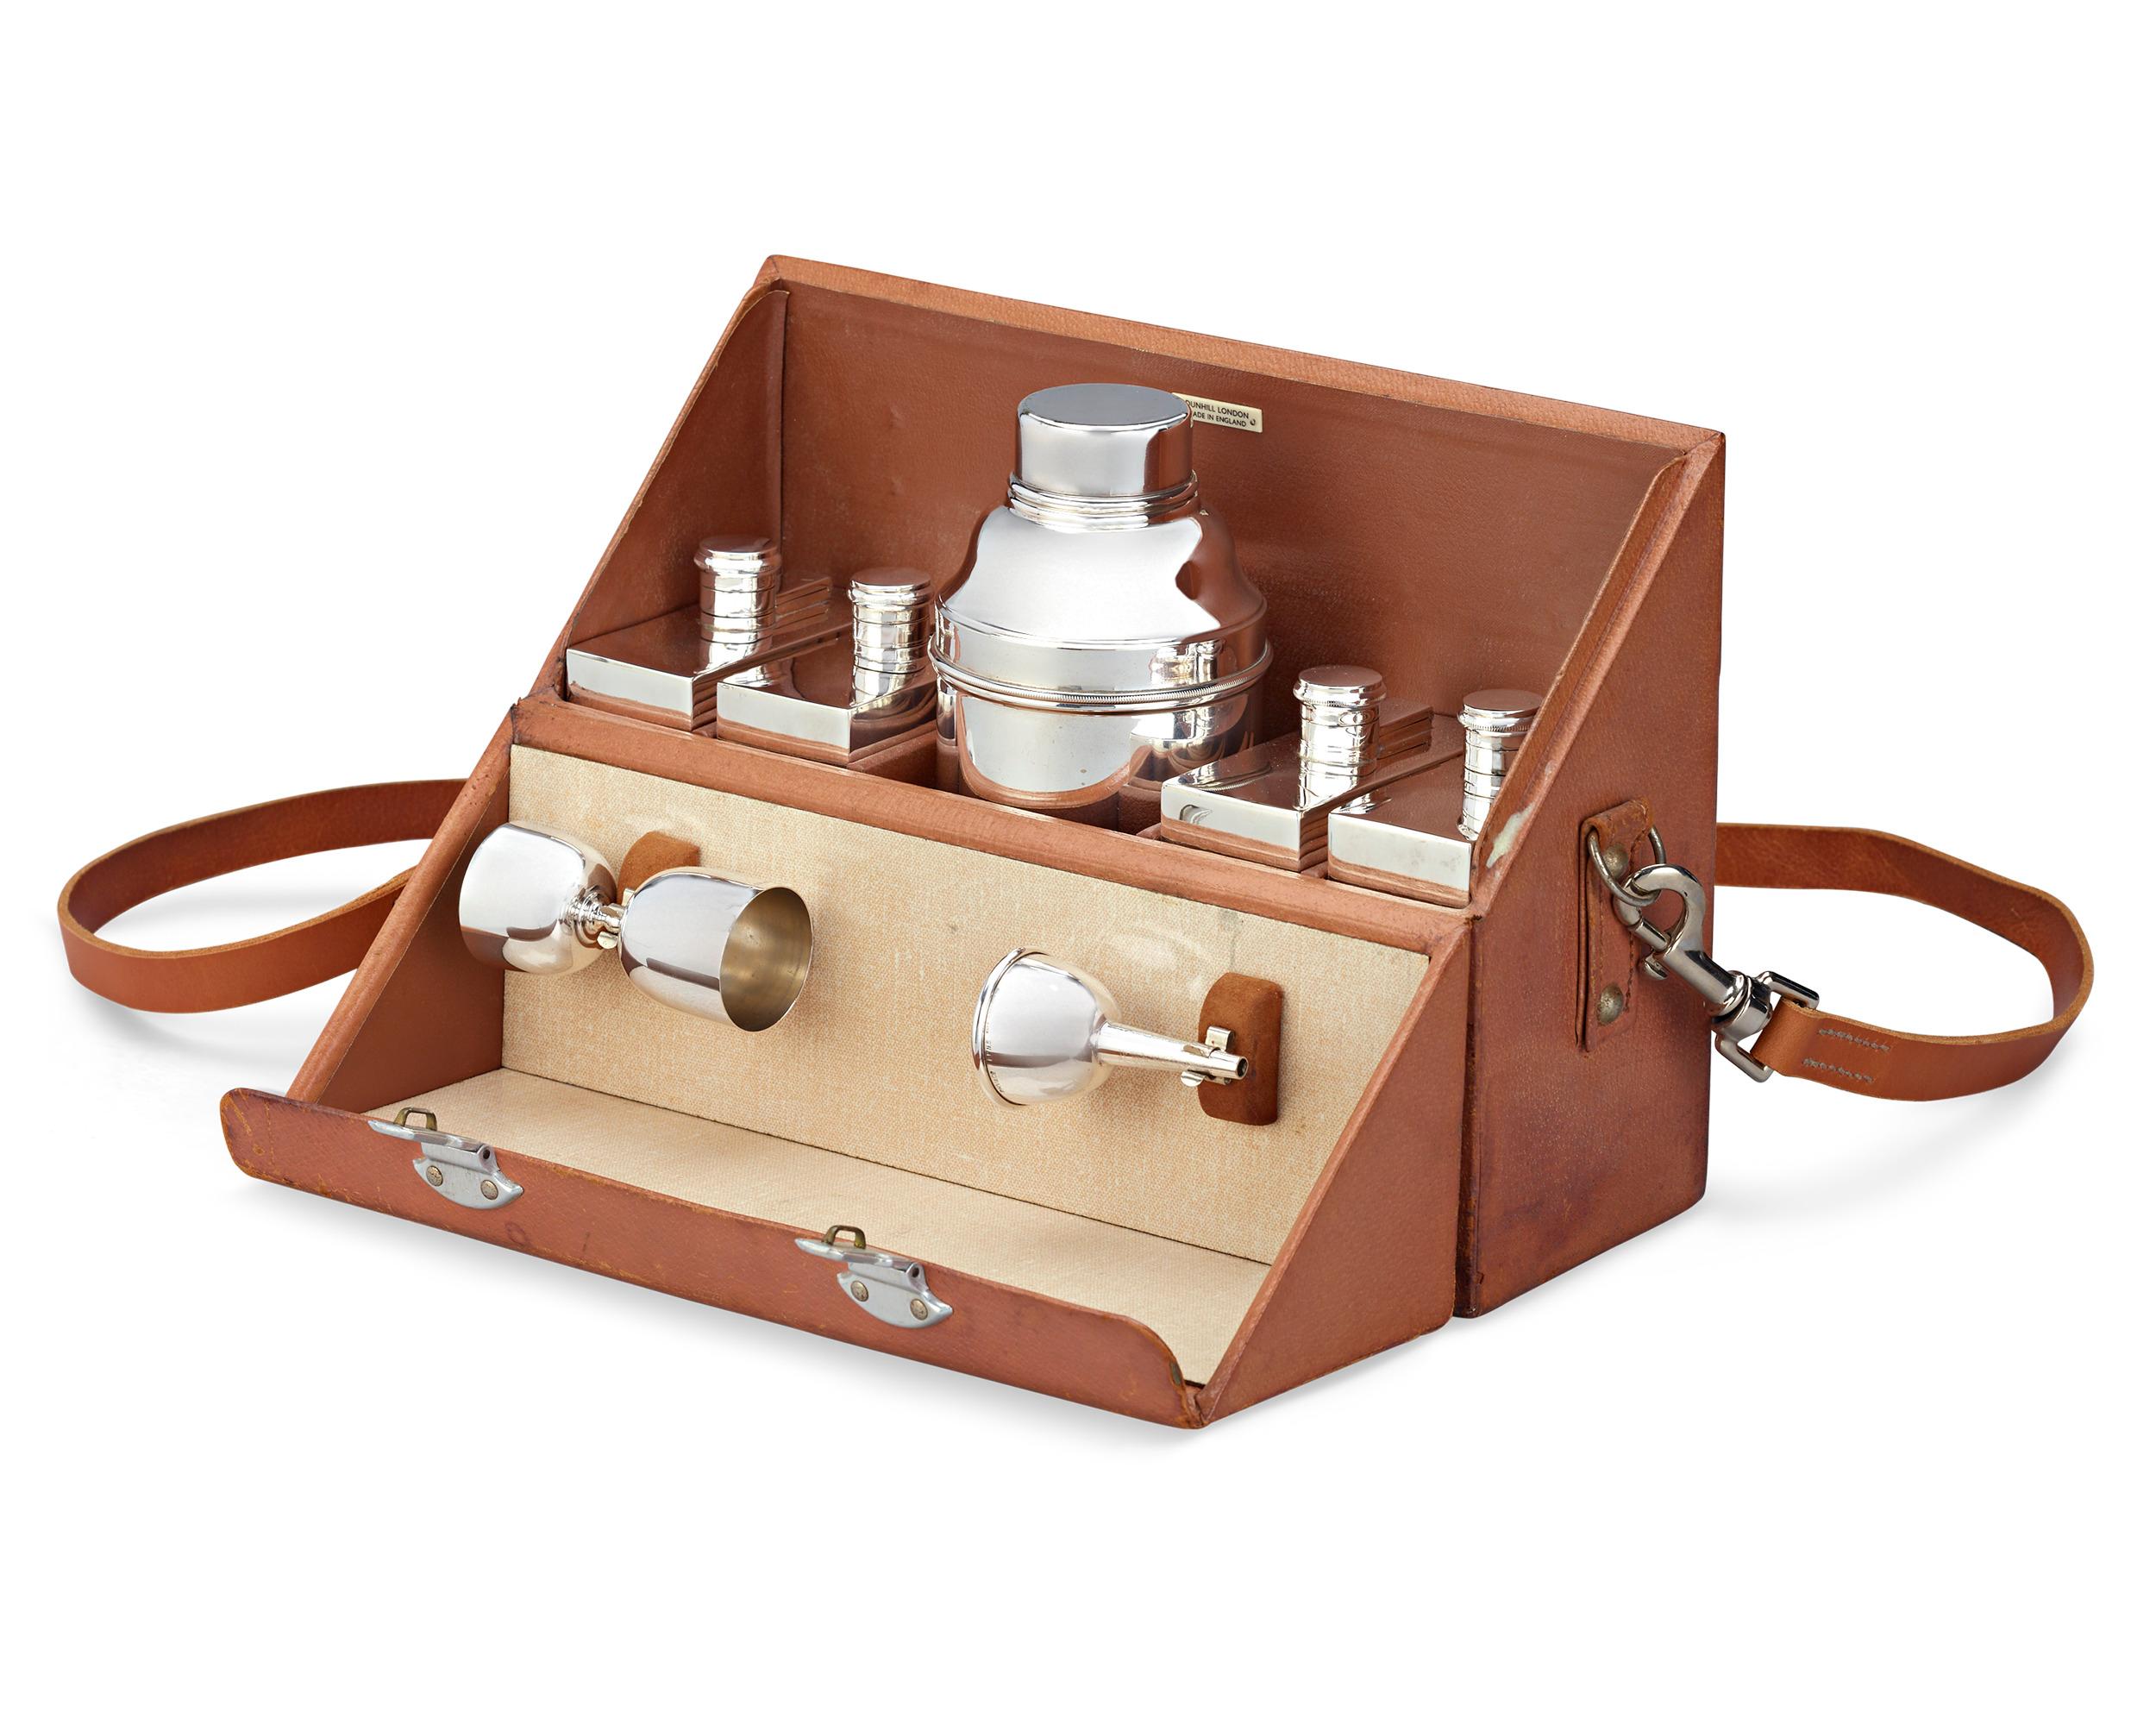 This complete traveling cocktail set by P. H. Vogel & Co. for Alfred Dunhill is both a rare and nostalgic reminder of the glamorous days when the cocktail reigned supreme. Crafted from electroplated nickel silver, it features everything needed to